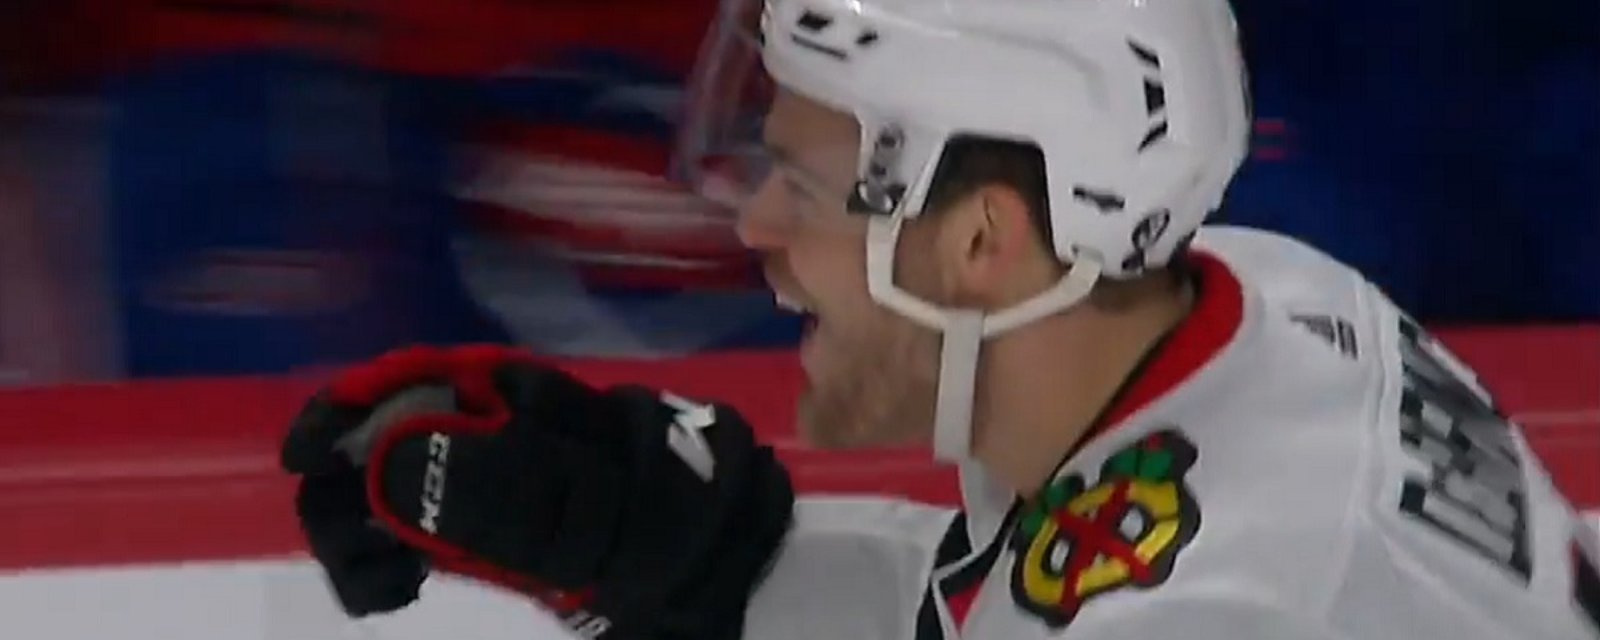 DeBrincat smiles from ear to ear after beating Price for his first career goal.